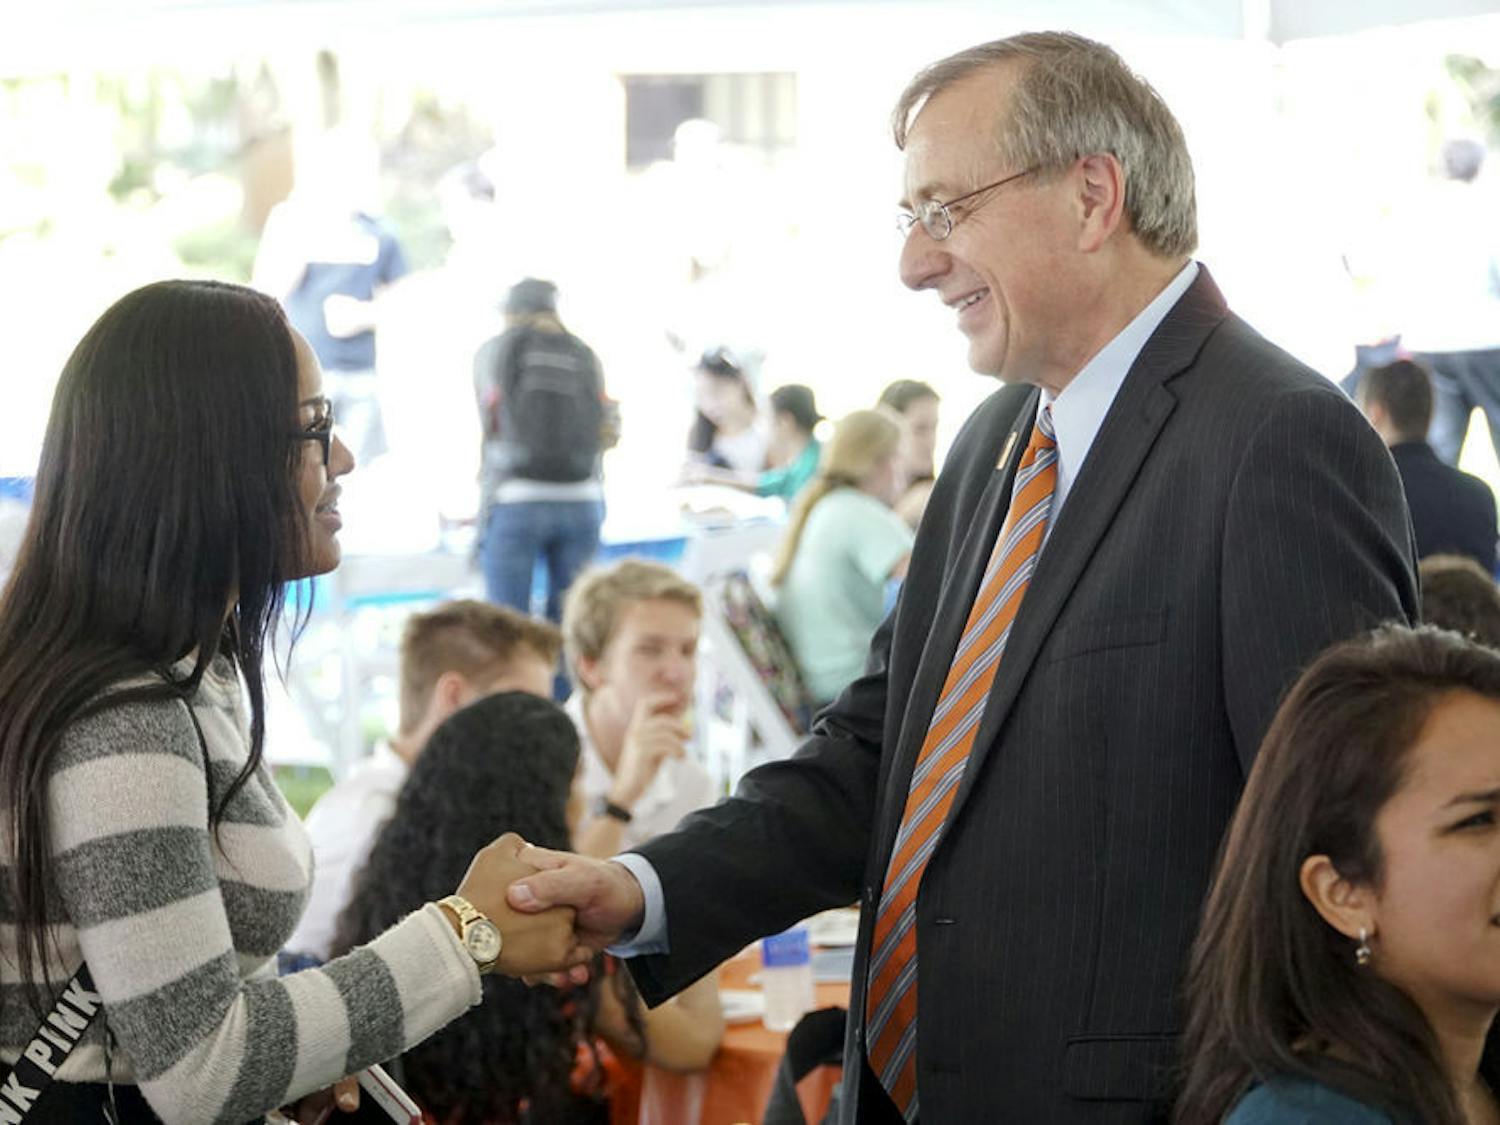 Daniela Gonzalez, an 18-year-old UF accounting freshman, shakes hands with President Fuchs during the Inauguration Week student event on the Reitz North Lawn on Nov. 30, 2015. Gonzalez, an assistant student government treasurer, said she has met Fuchs before but was happy to see him again.